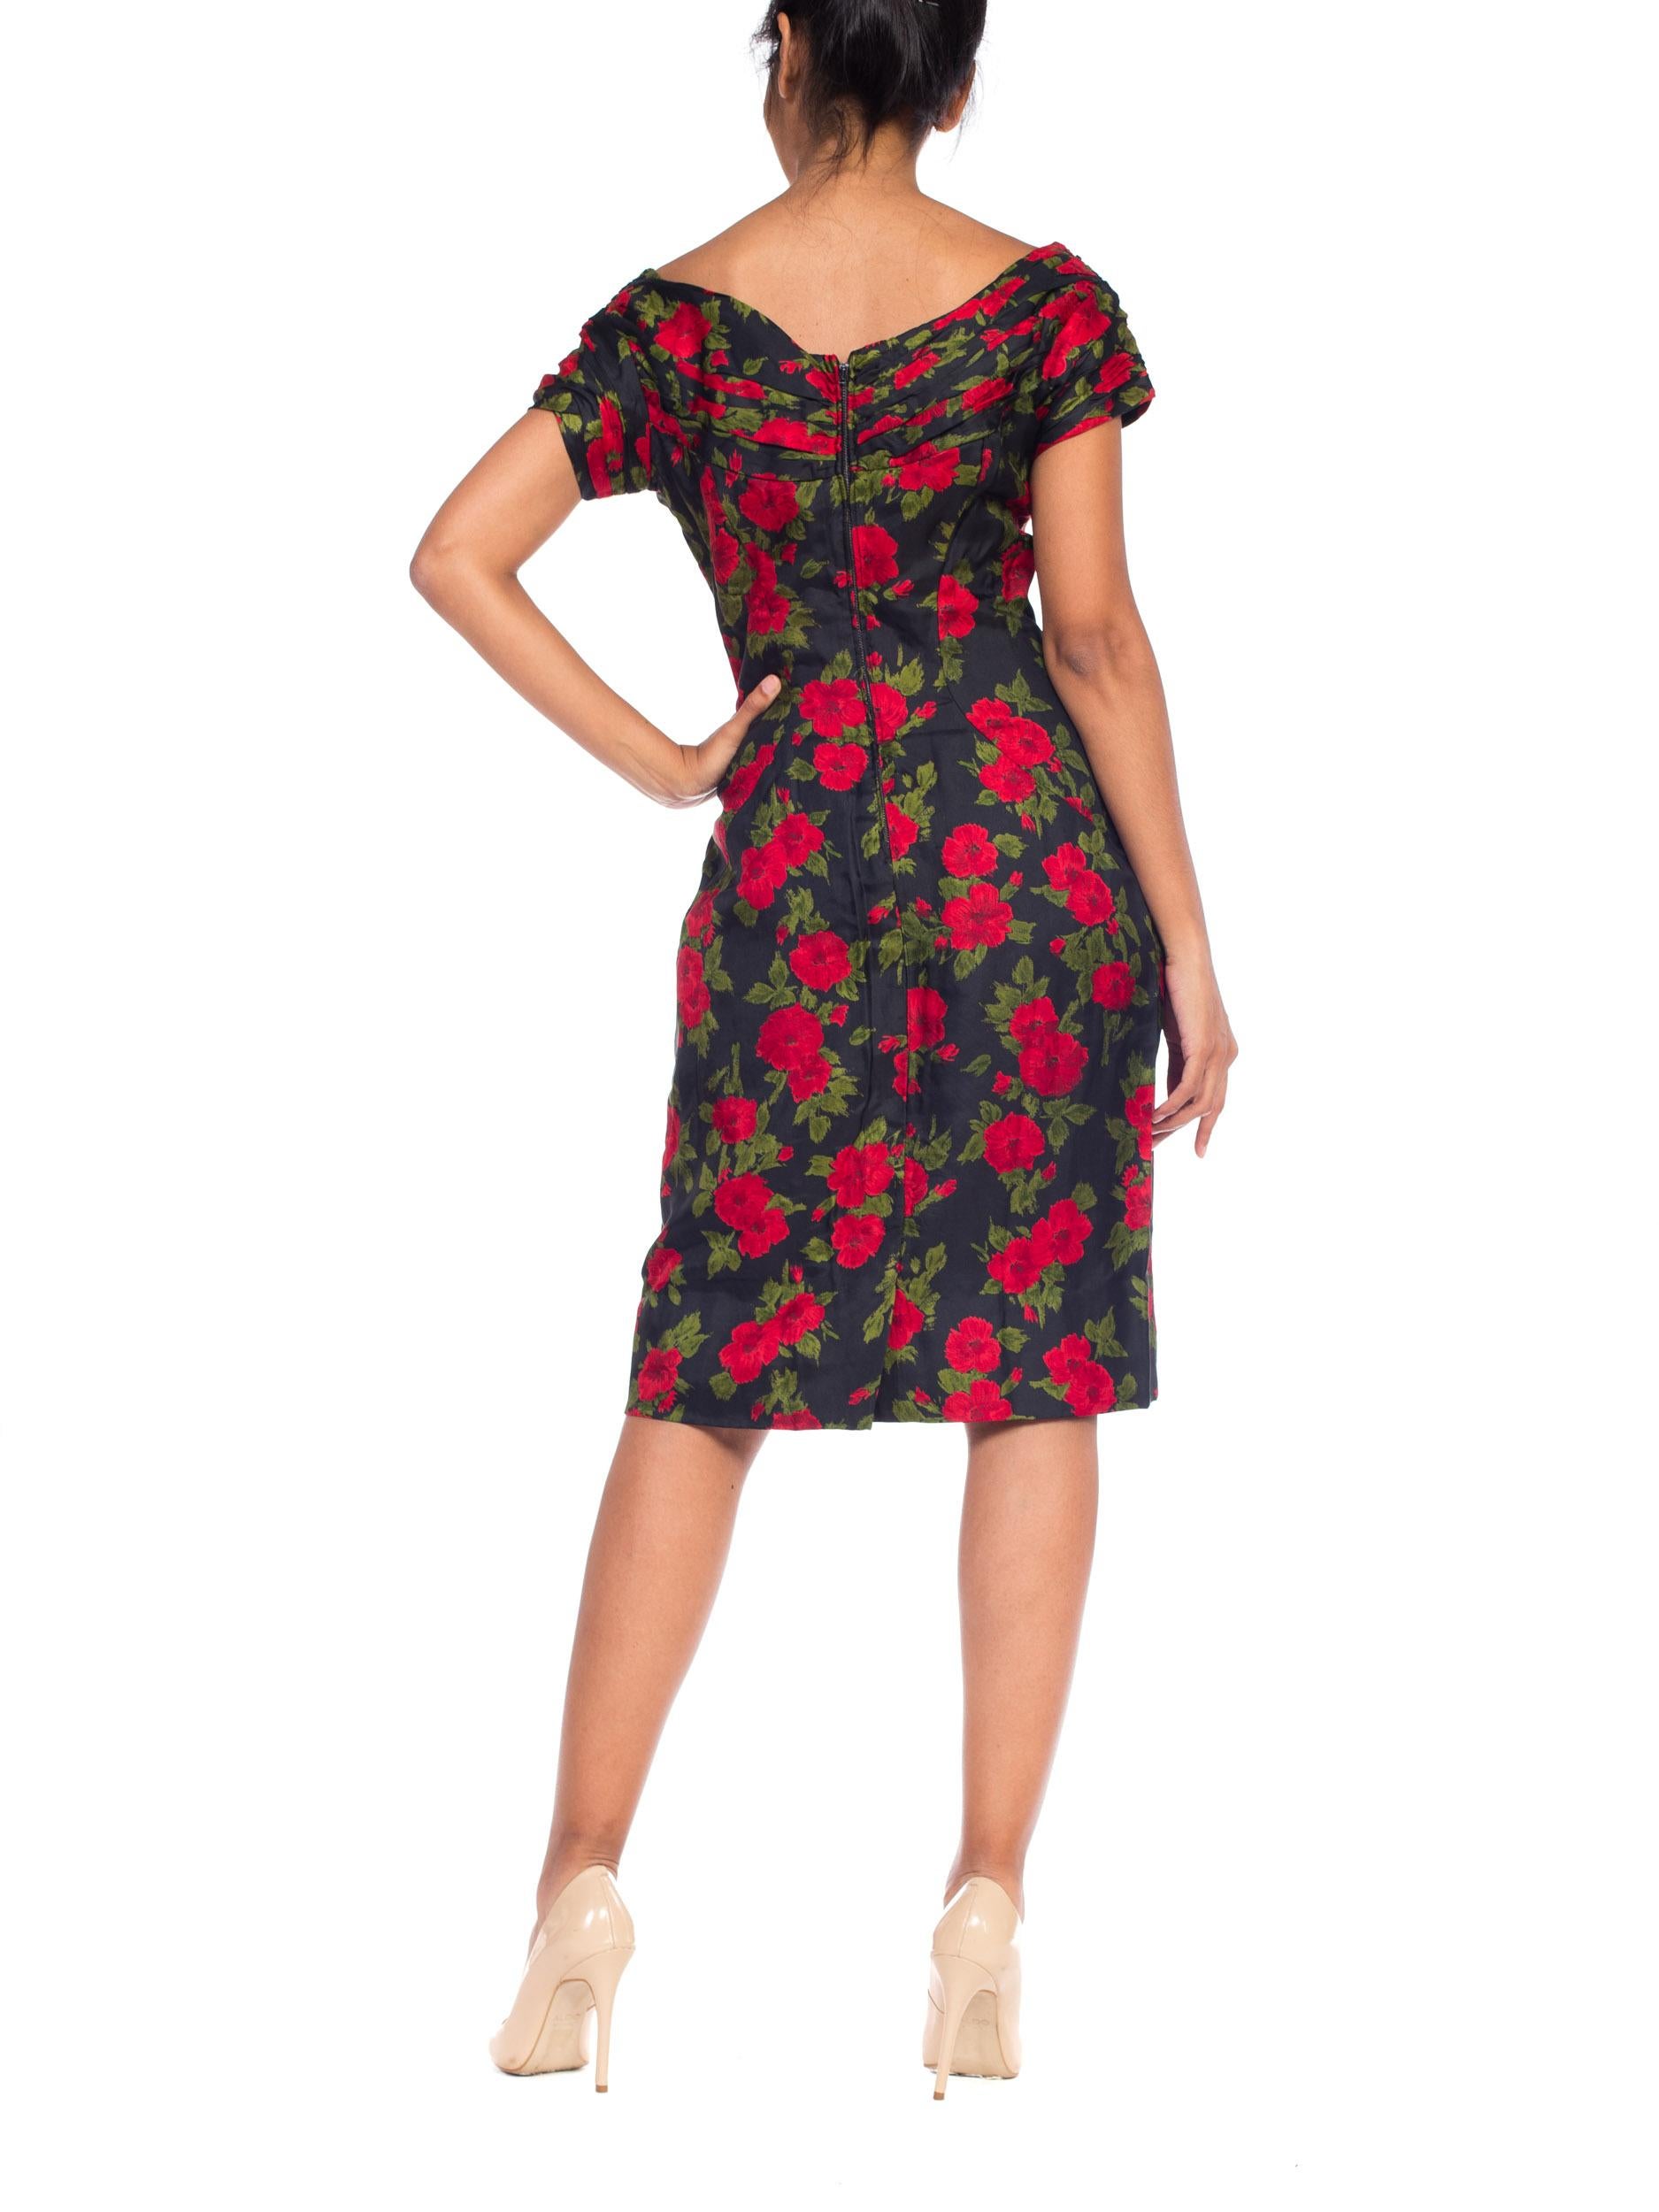 1950S DOLCE & GABBANA Style Silk Twill Red Black Classic Rose Floral Printed Dr For Sale 3